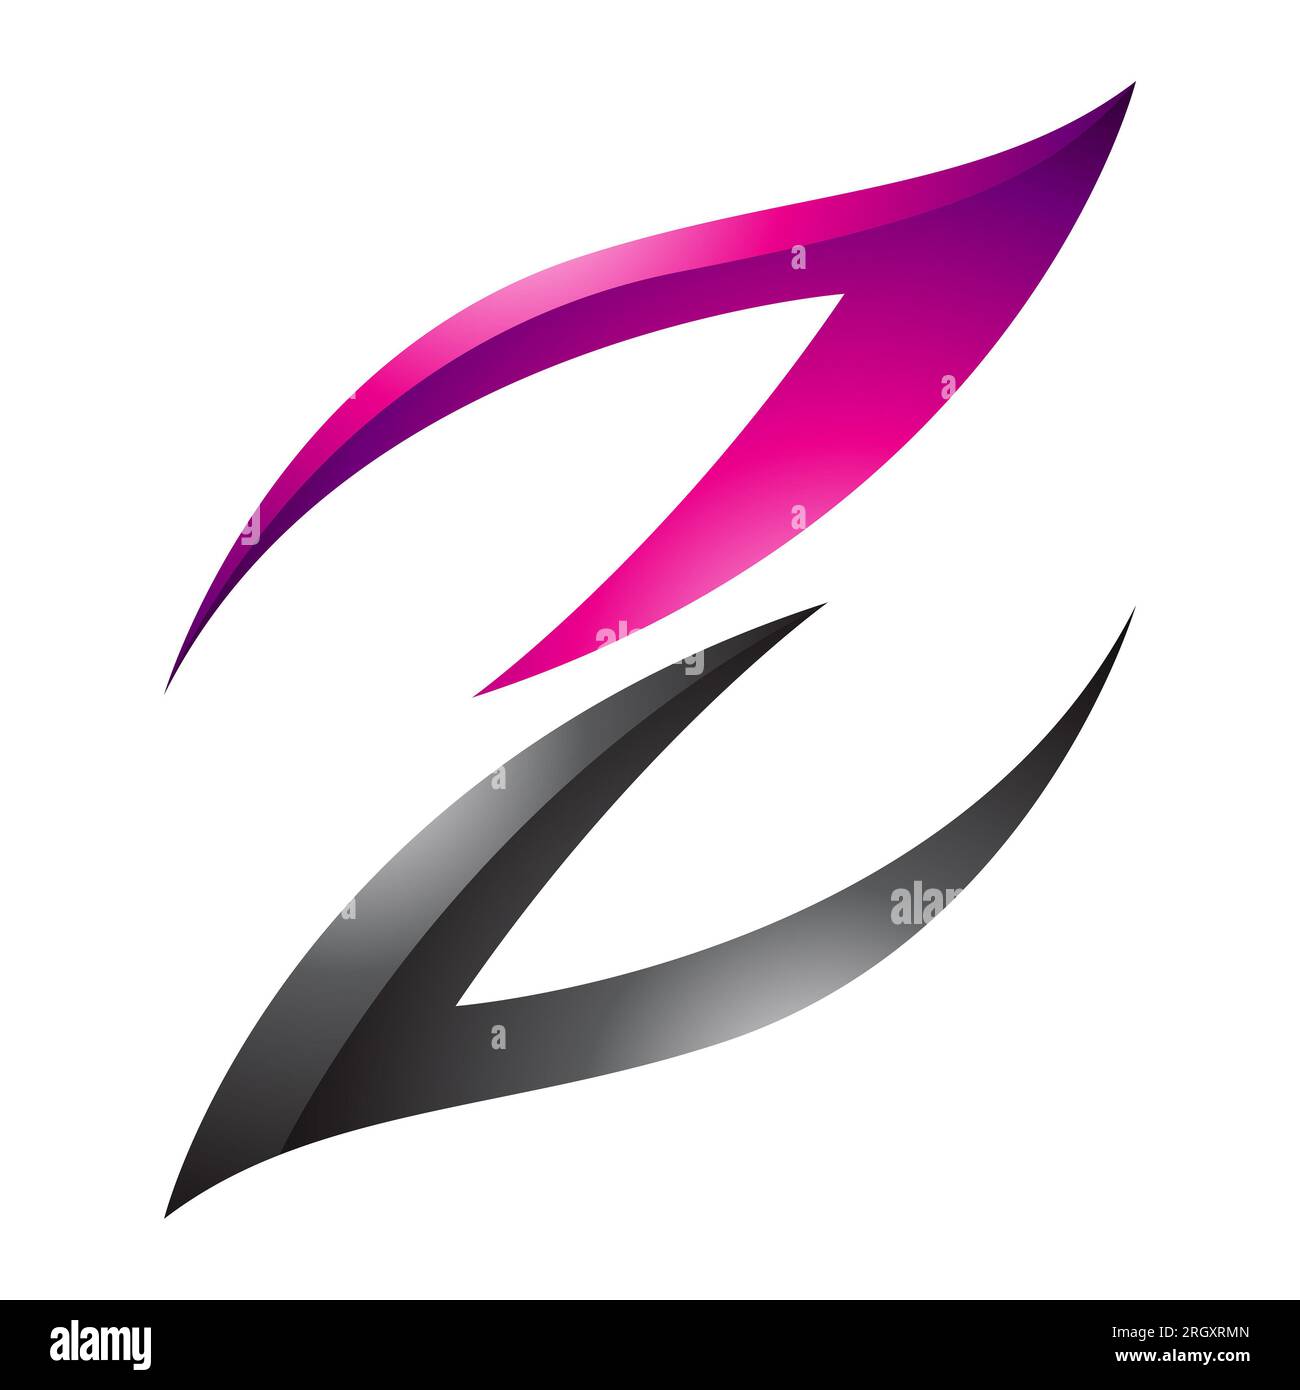 Magenta and Black Glossy Fire Shaped Letter Z Icon on a White Background Stock Photo